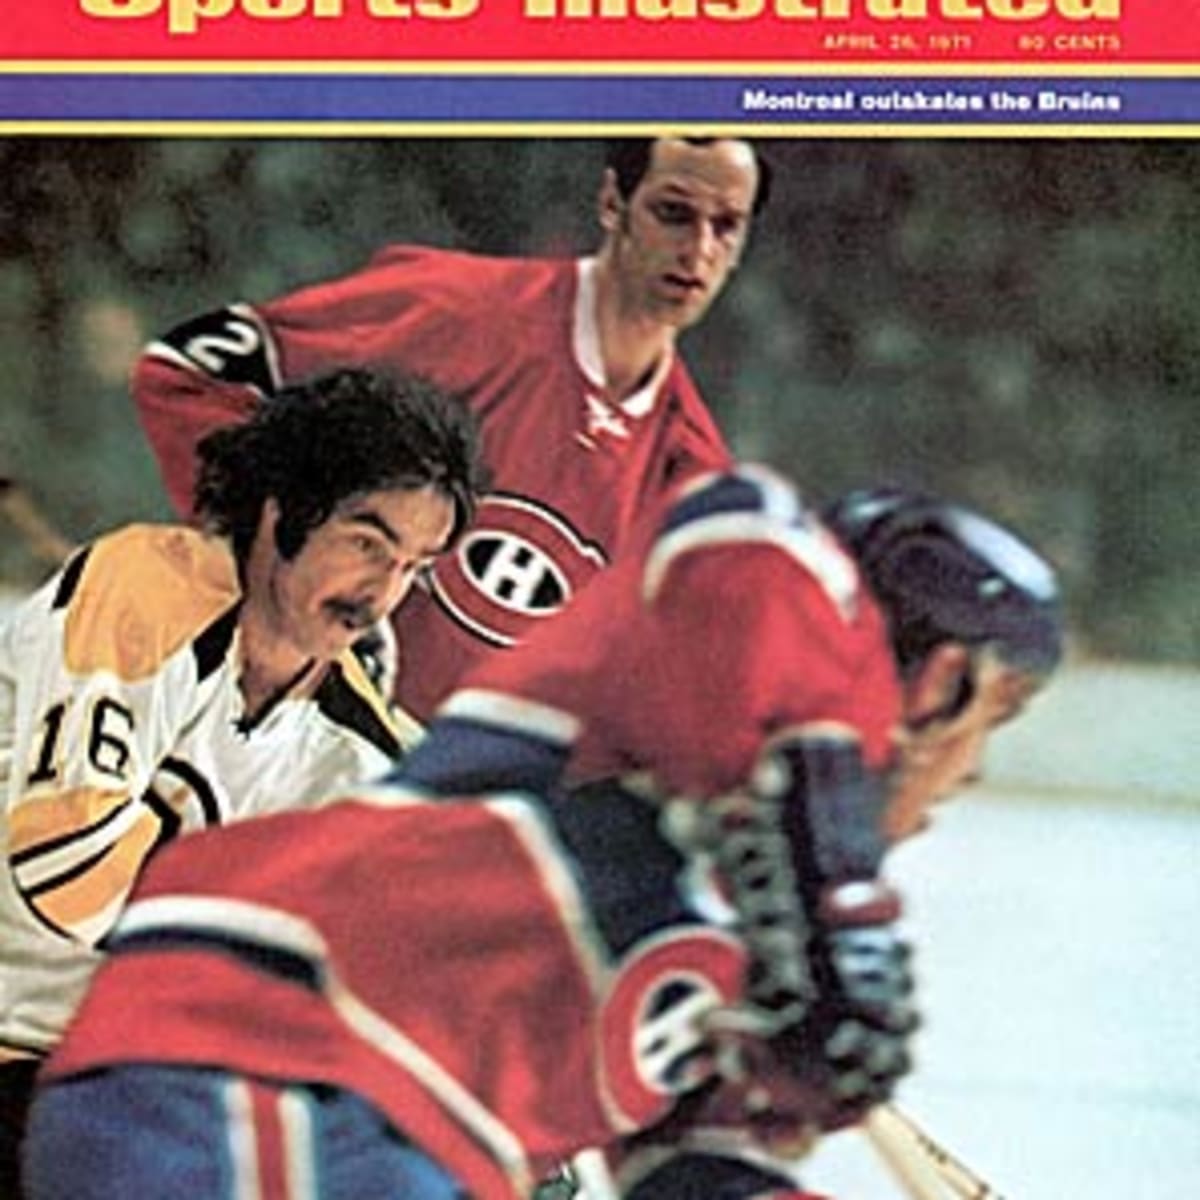 Derek Sanderson tells of wild rise and fall in book - Sports Illustrated